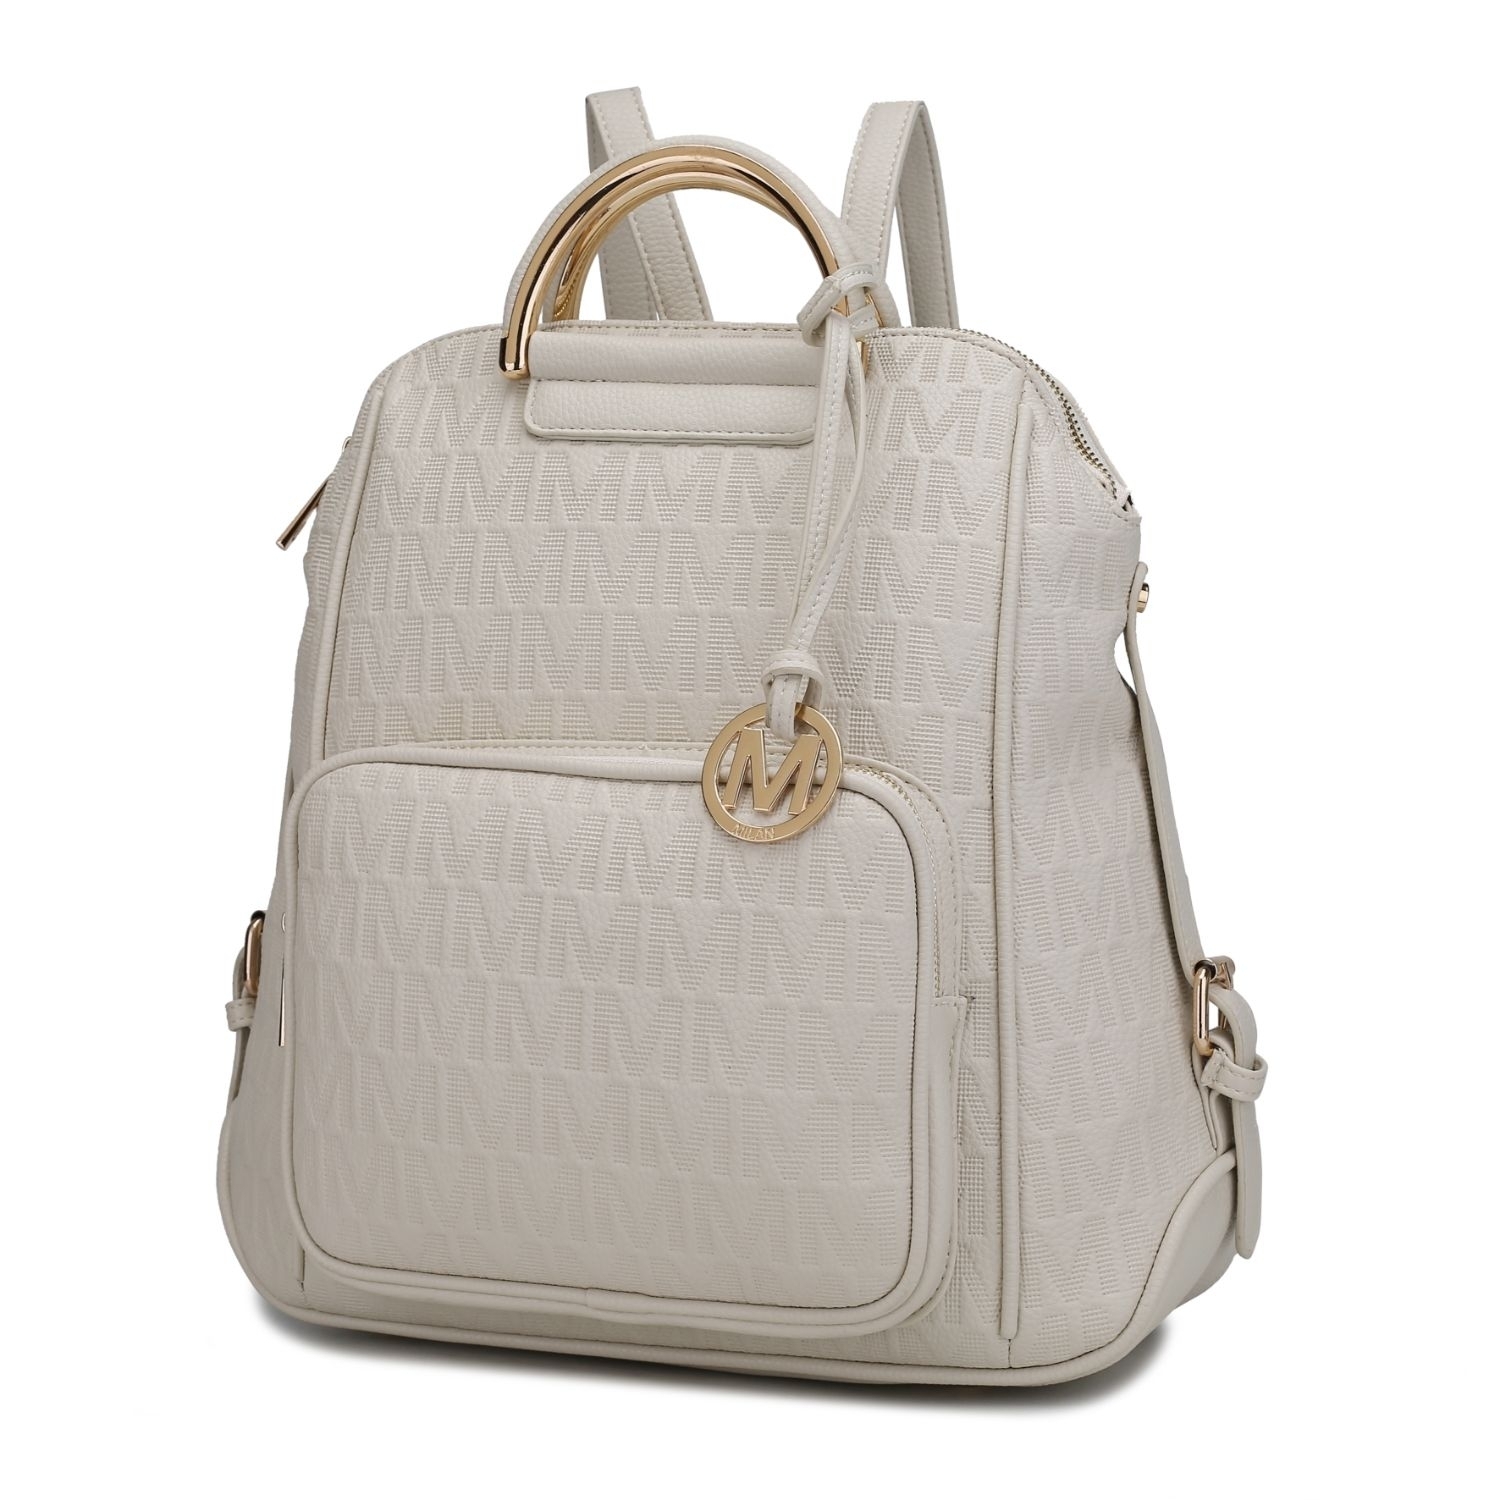 MKF Collection Torra Milan .M. Signature Trendy Backpack By Mia K. - Taupe